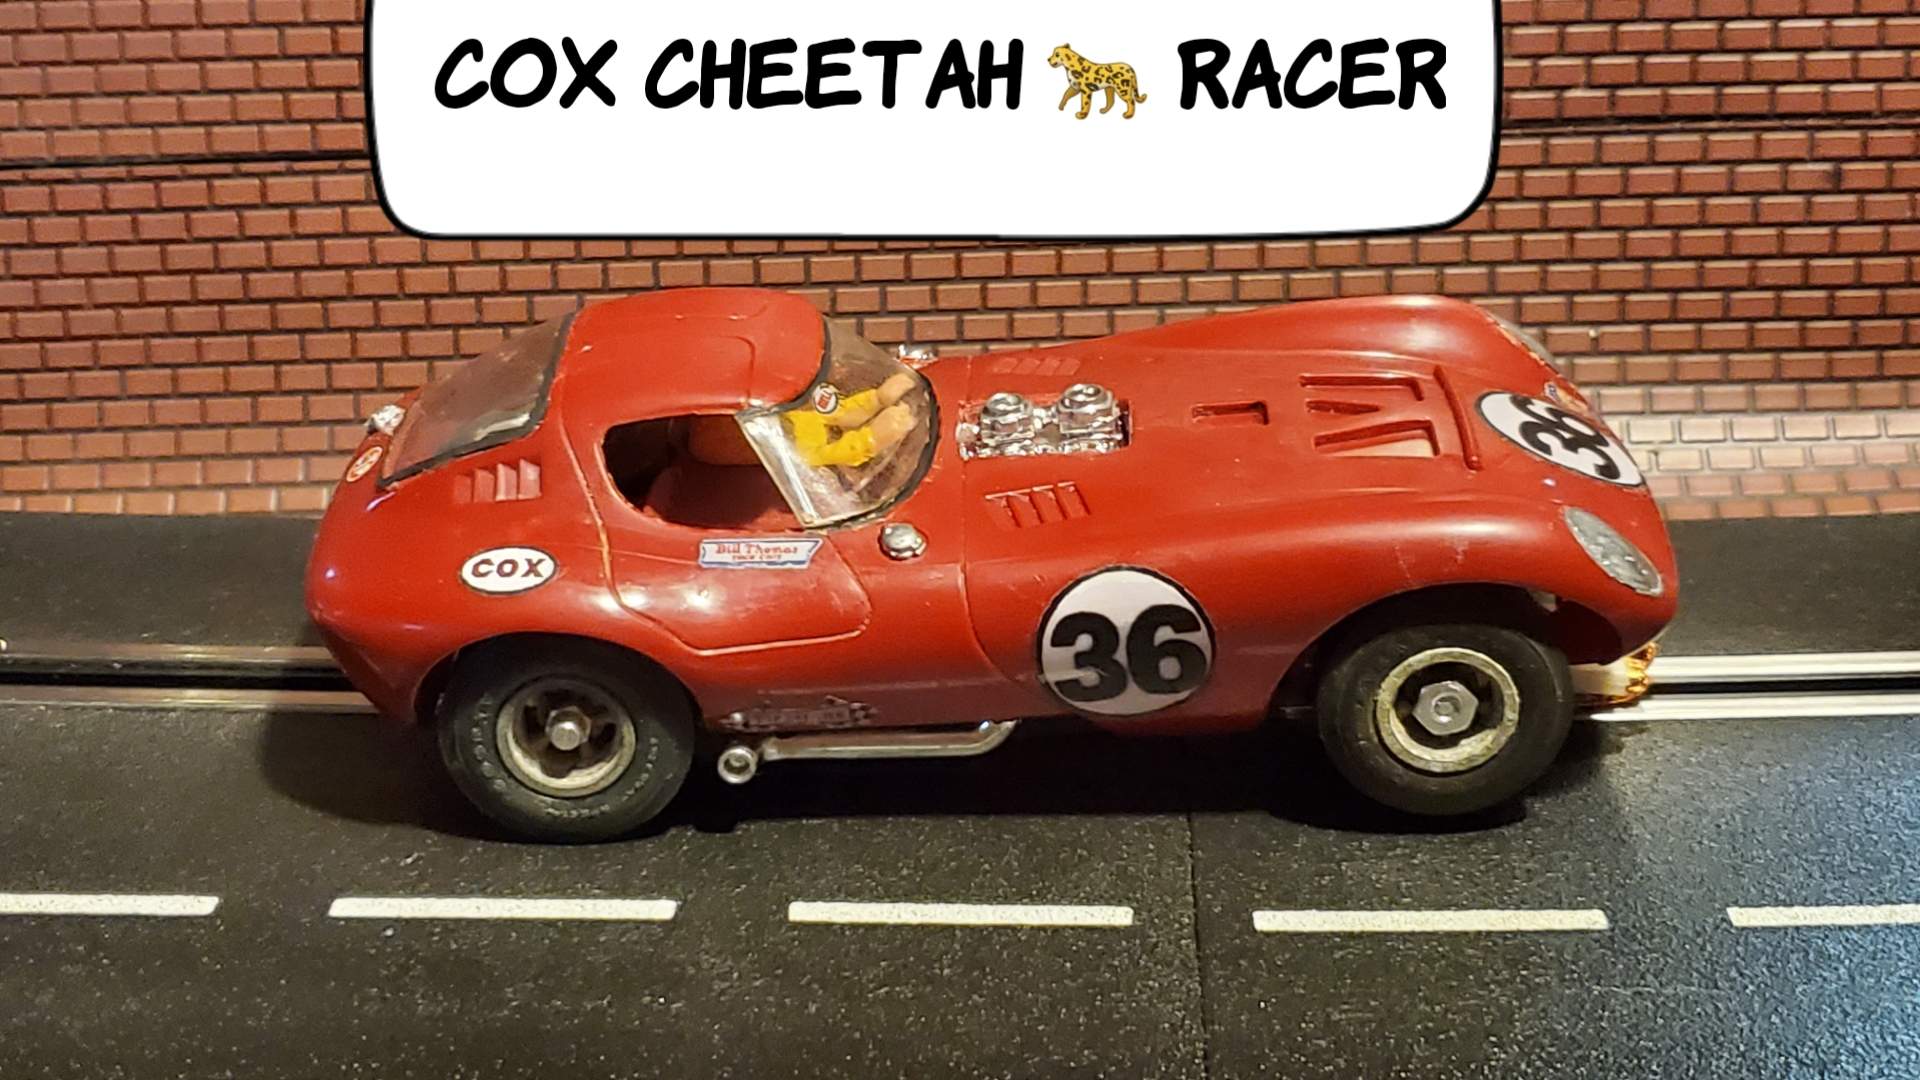 *Sale*, Save $30 vs. our $325.00 Ebay Store Price * COX Cheetah Racer Slot Car 1/24 Scale Car 36 Bill Thomas Racing